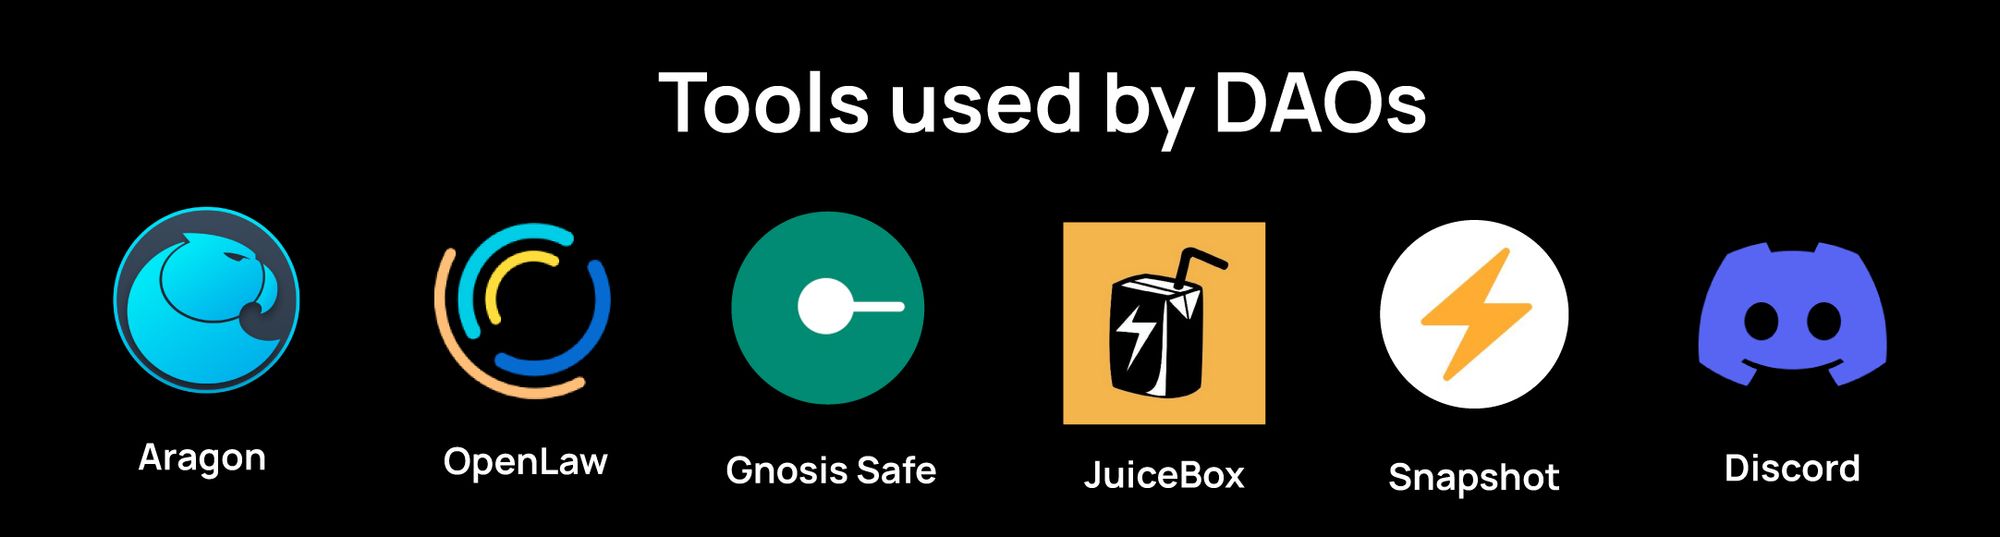 Tools used by DAOs